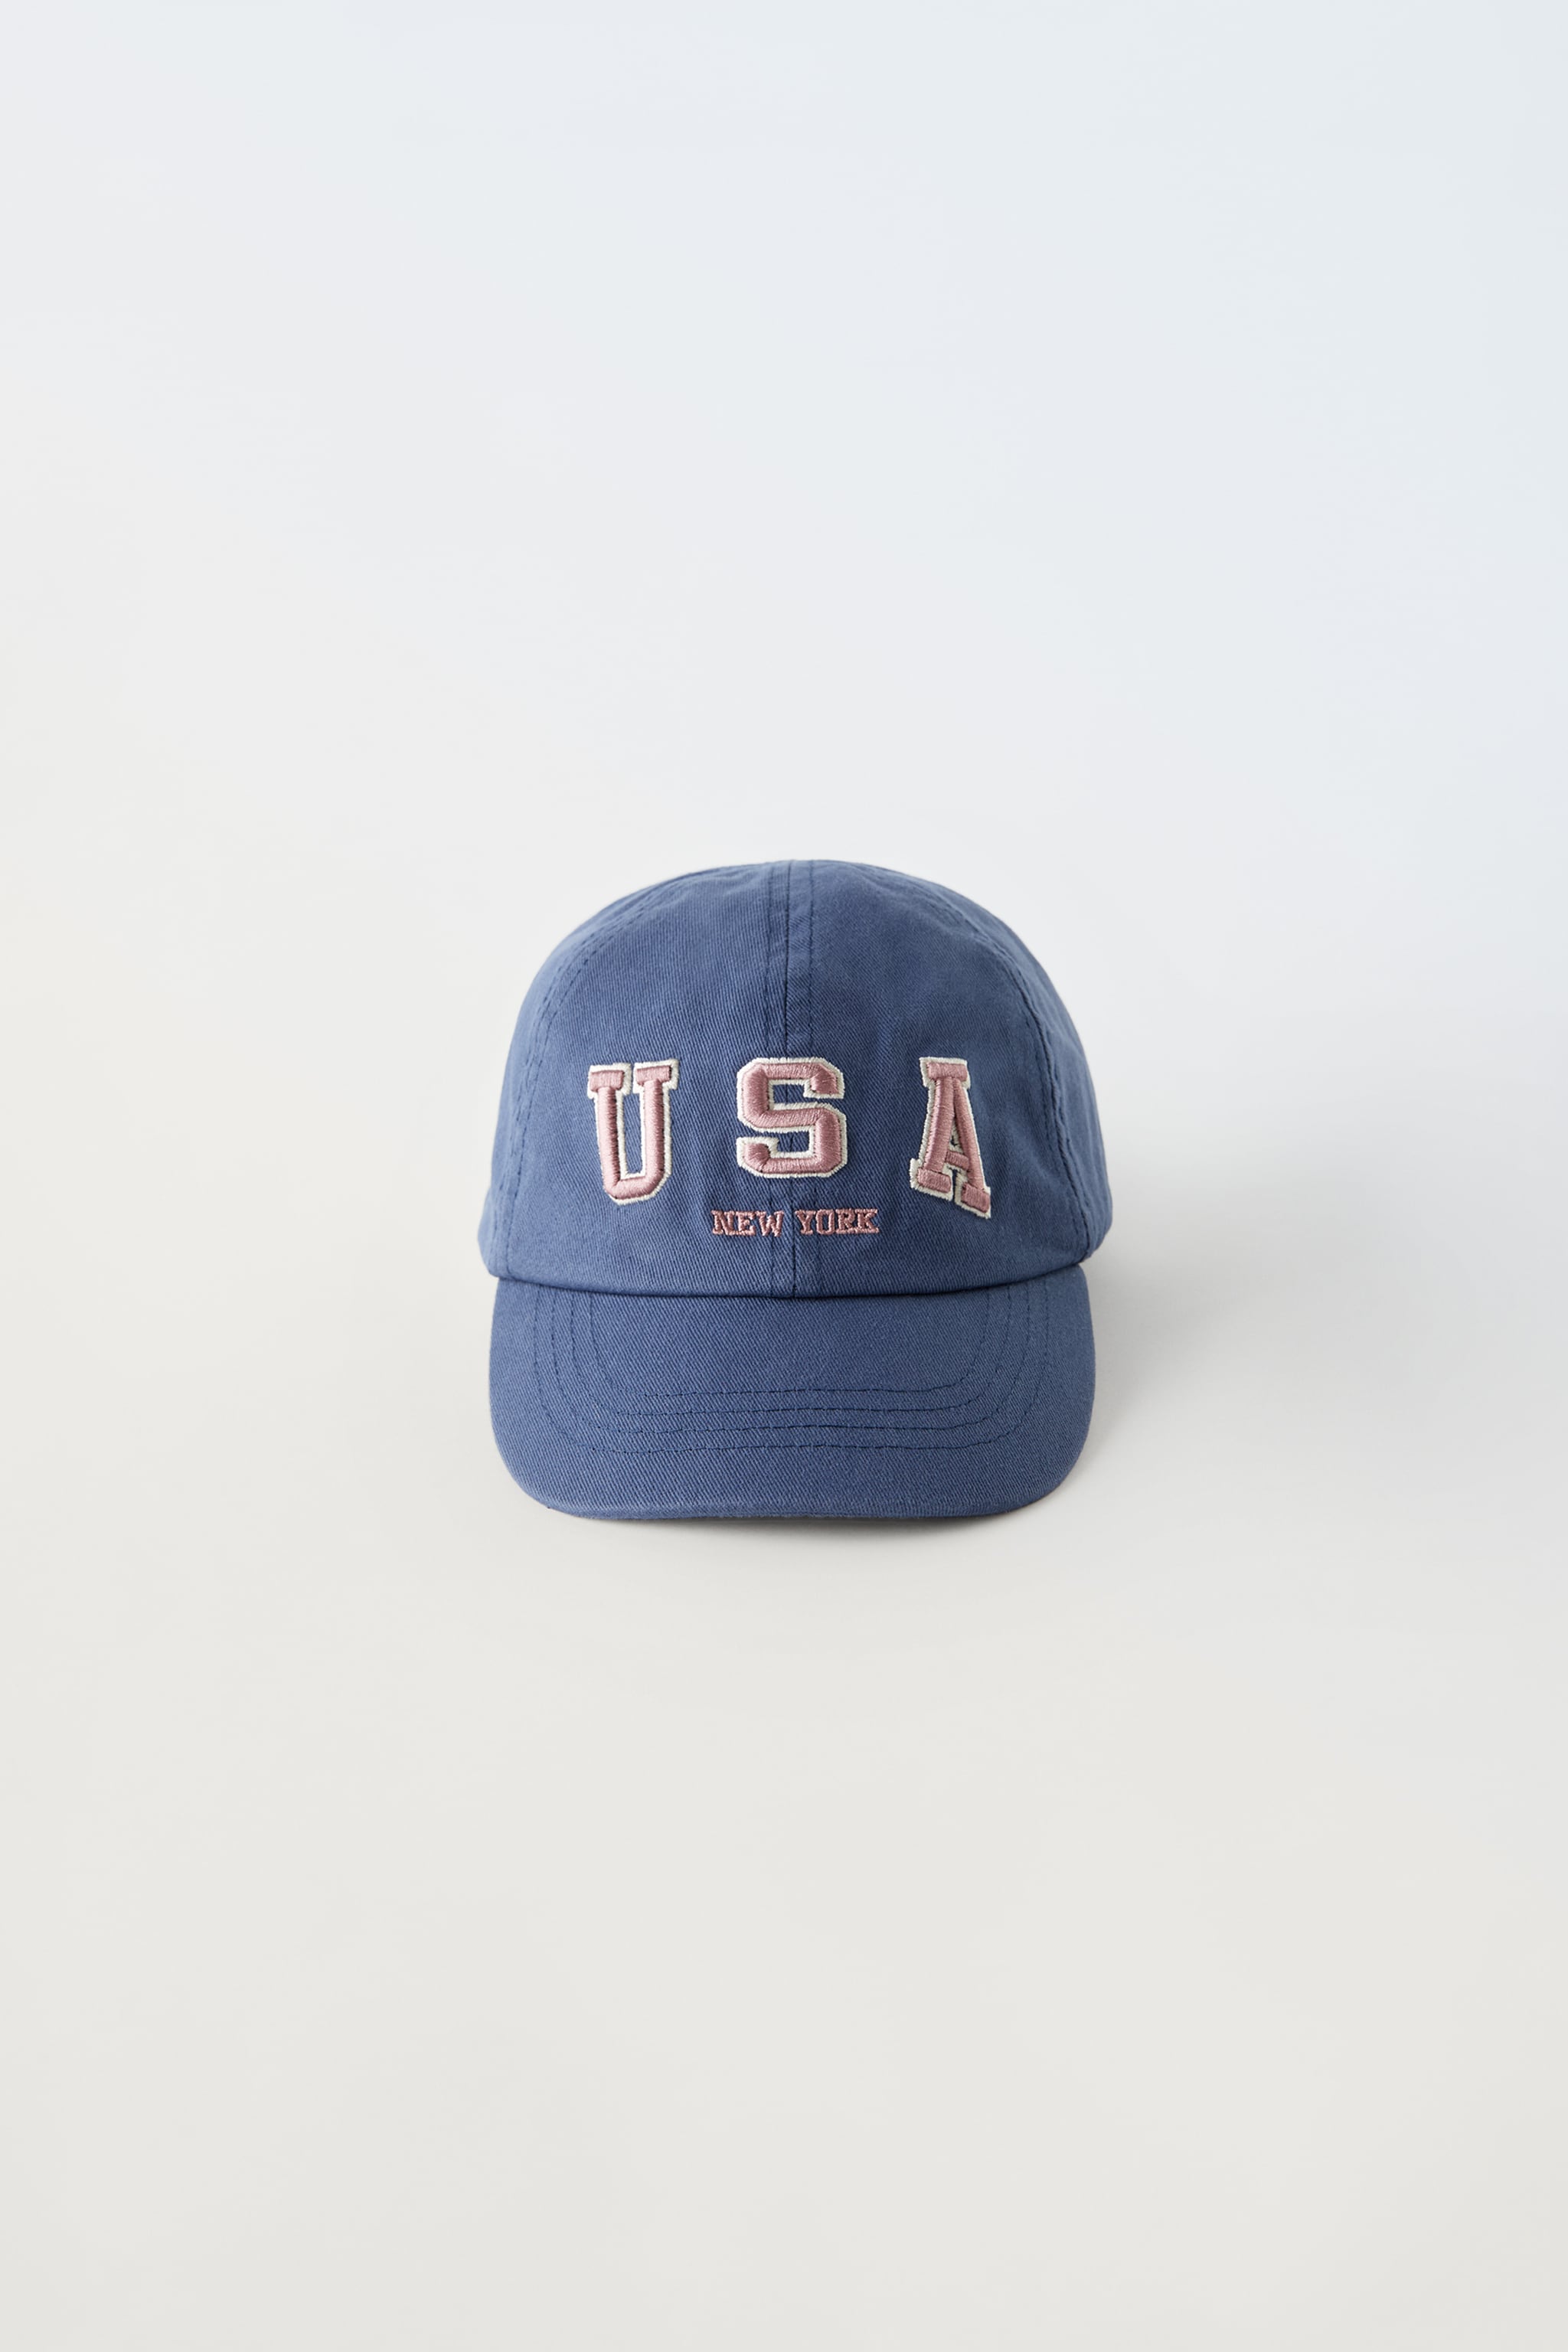 “USA” EMBROIDERED CAP